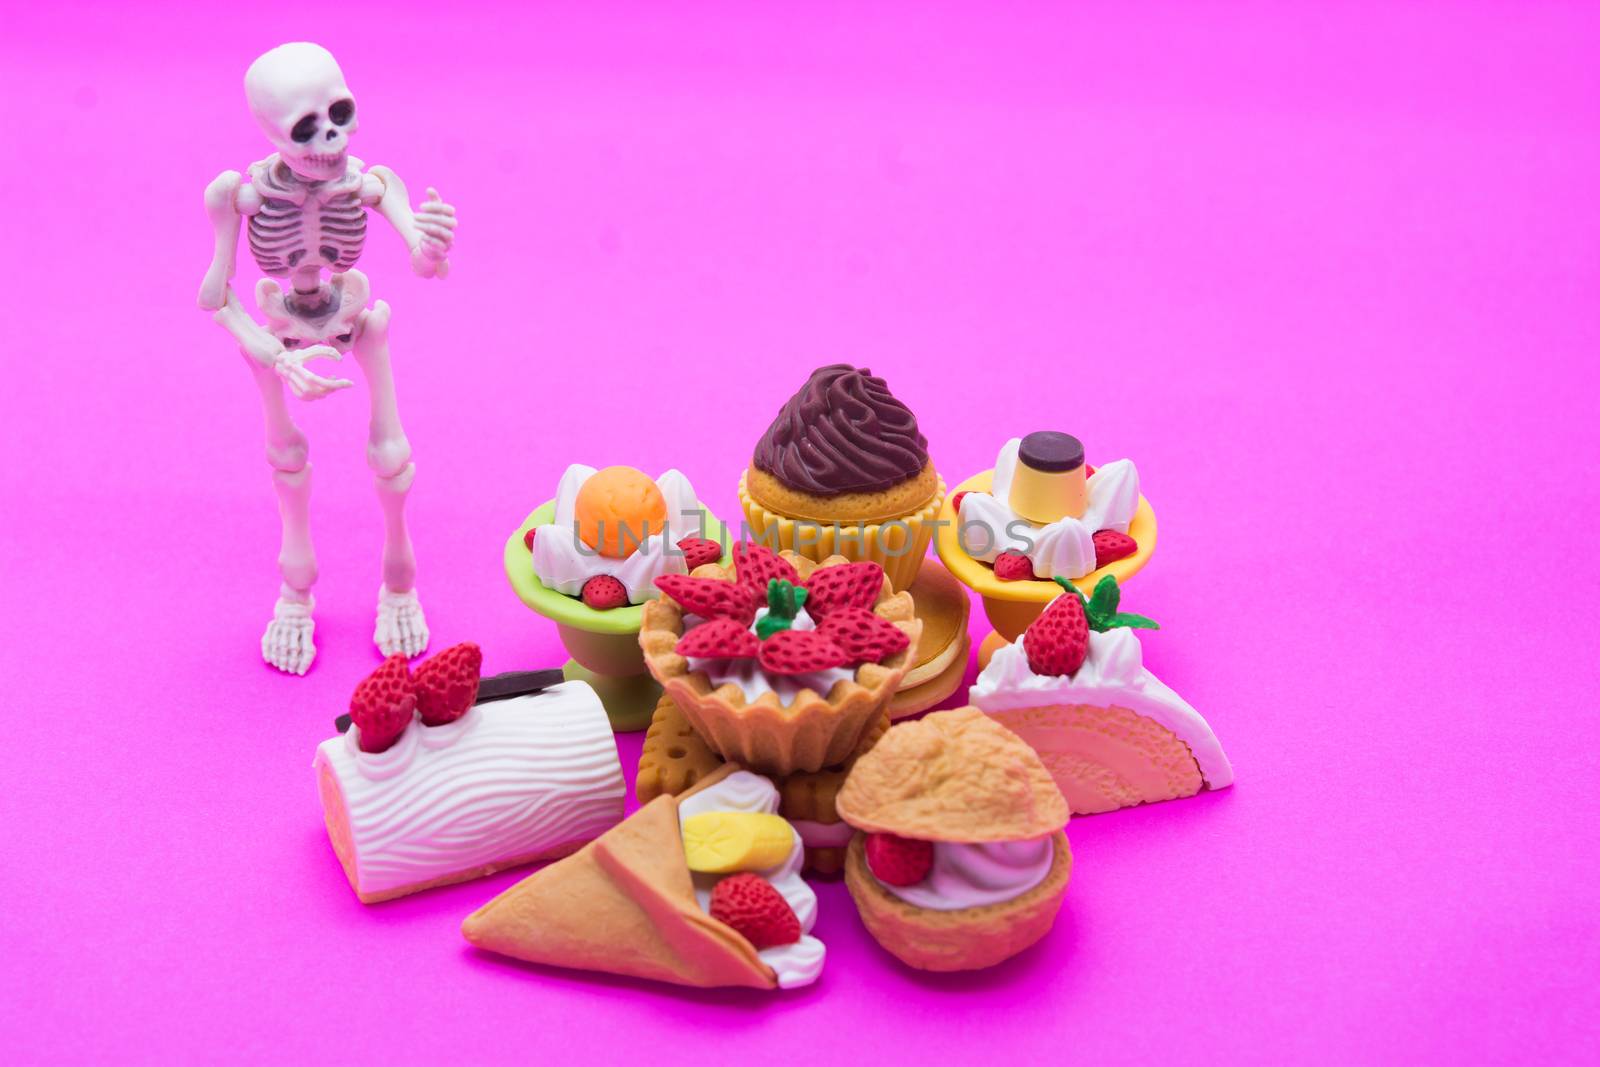 Skeleton and bakery, enjoy eating until death by yuiyuize